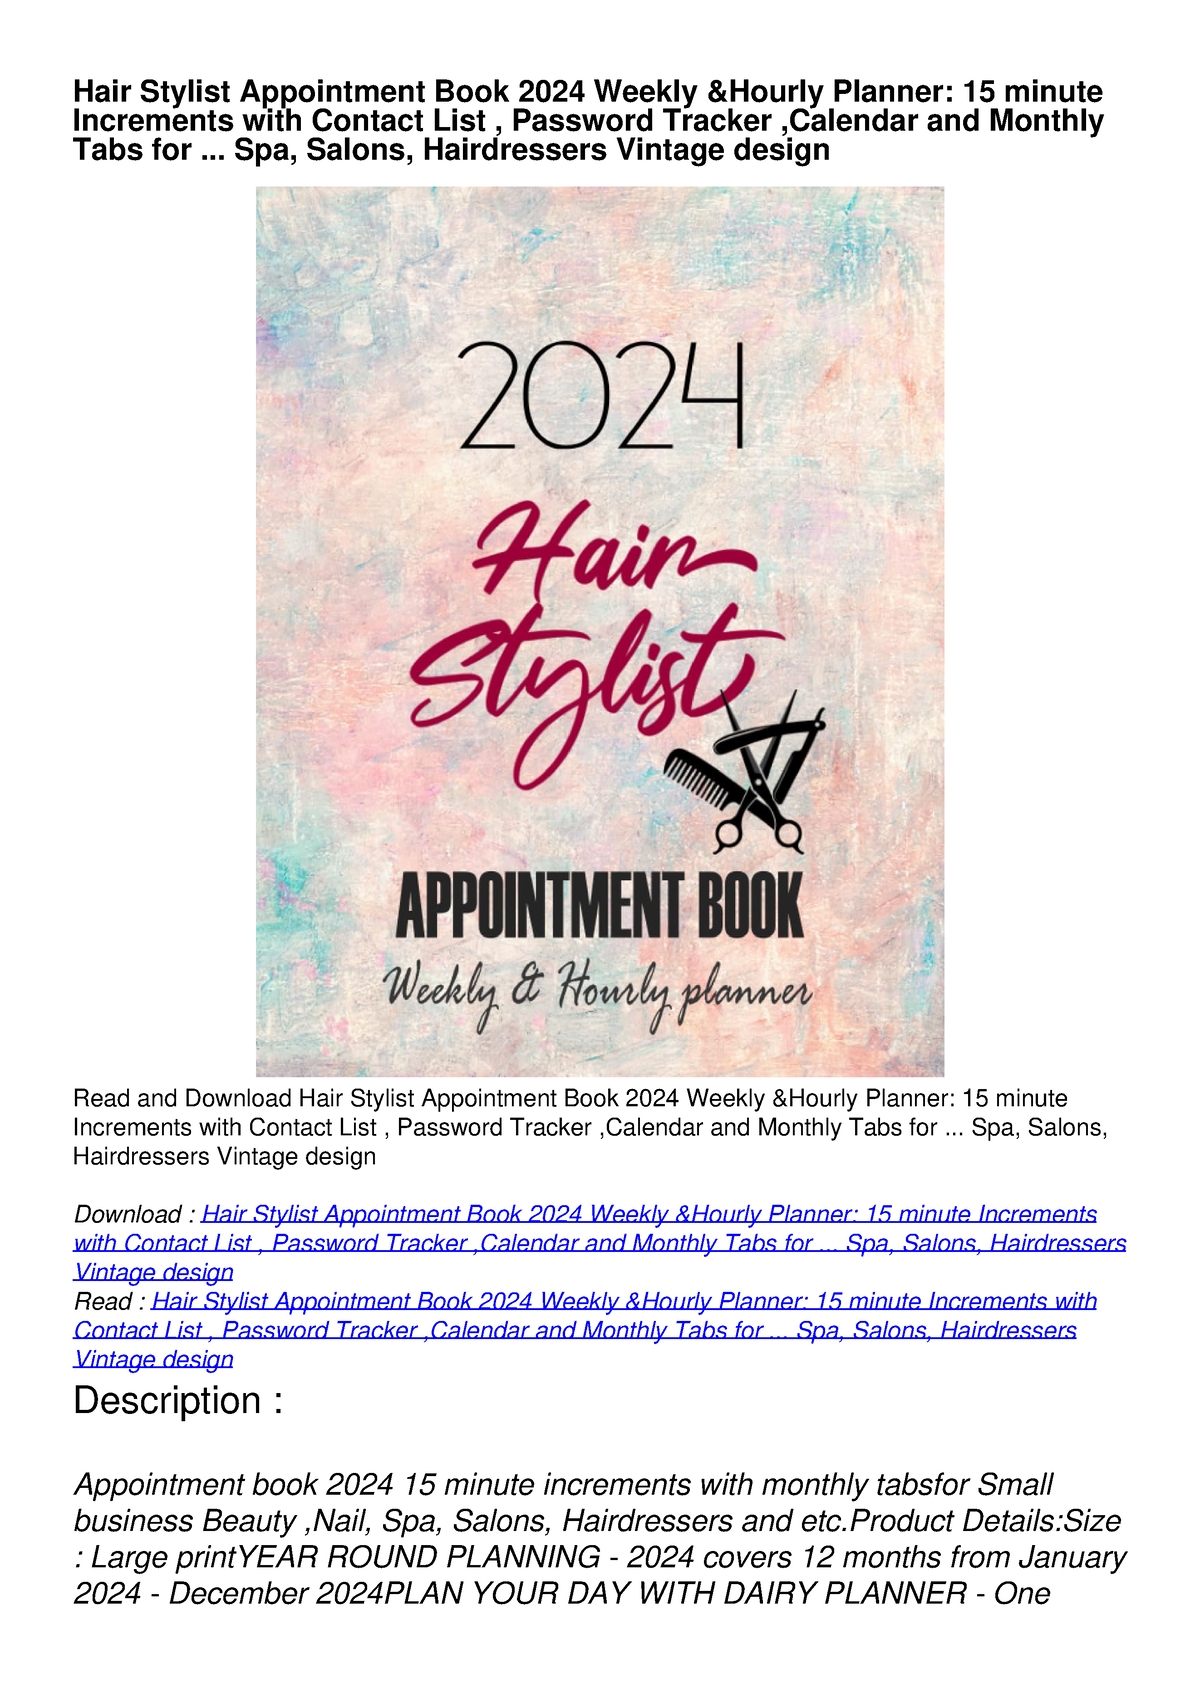 READ [PDF] Hair Stylist Appointment Book 2024 Weekly Hourly Planner 15